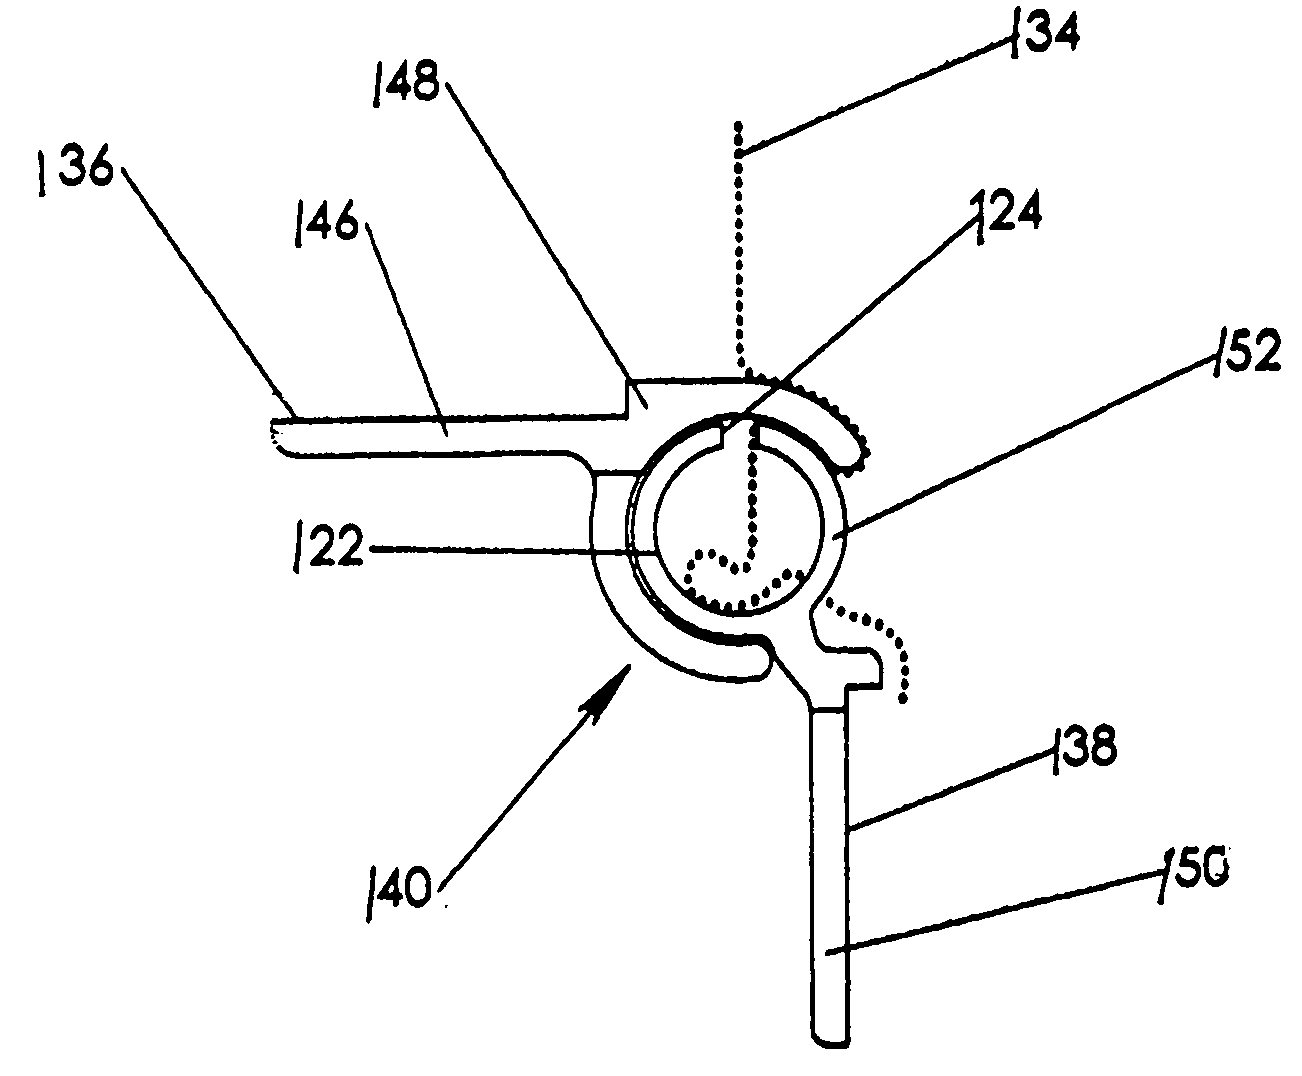 Toolbox latch and hinge apparatus and method